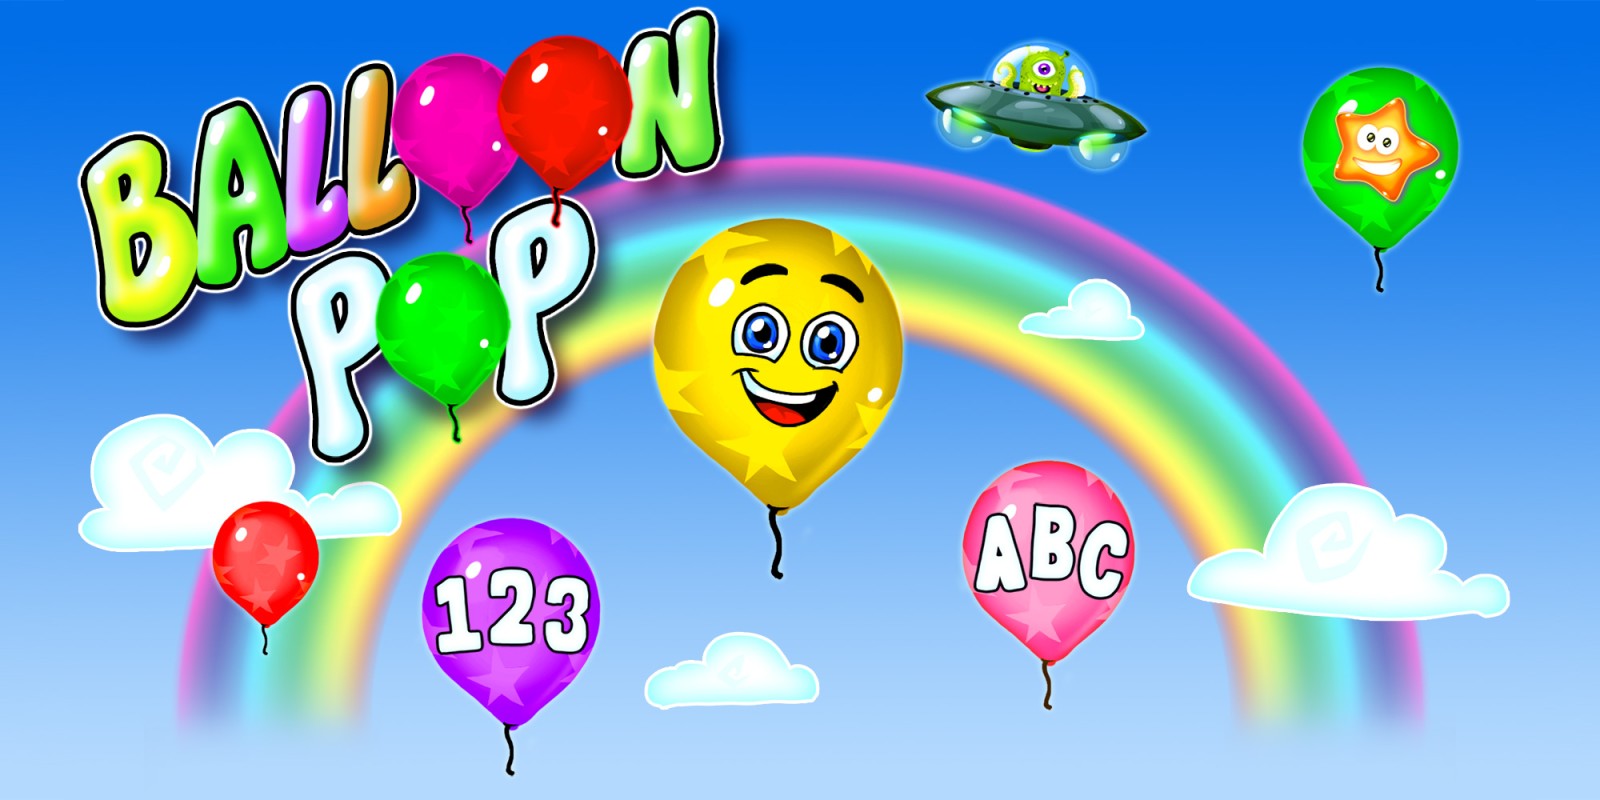 Balloon Pop - Learning Games for preschool Kids & Toddlers - Learn numbers, letters, shapes and colours in 14 languages